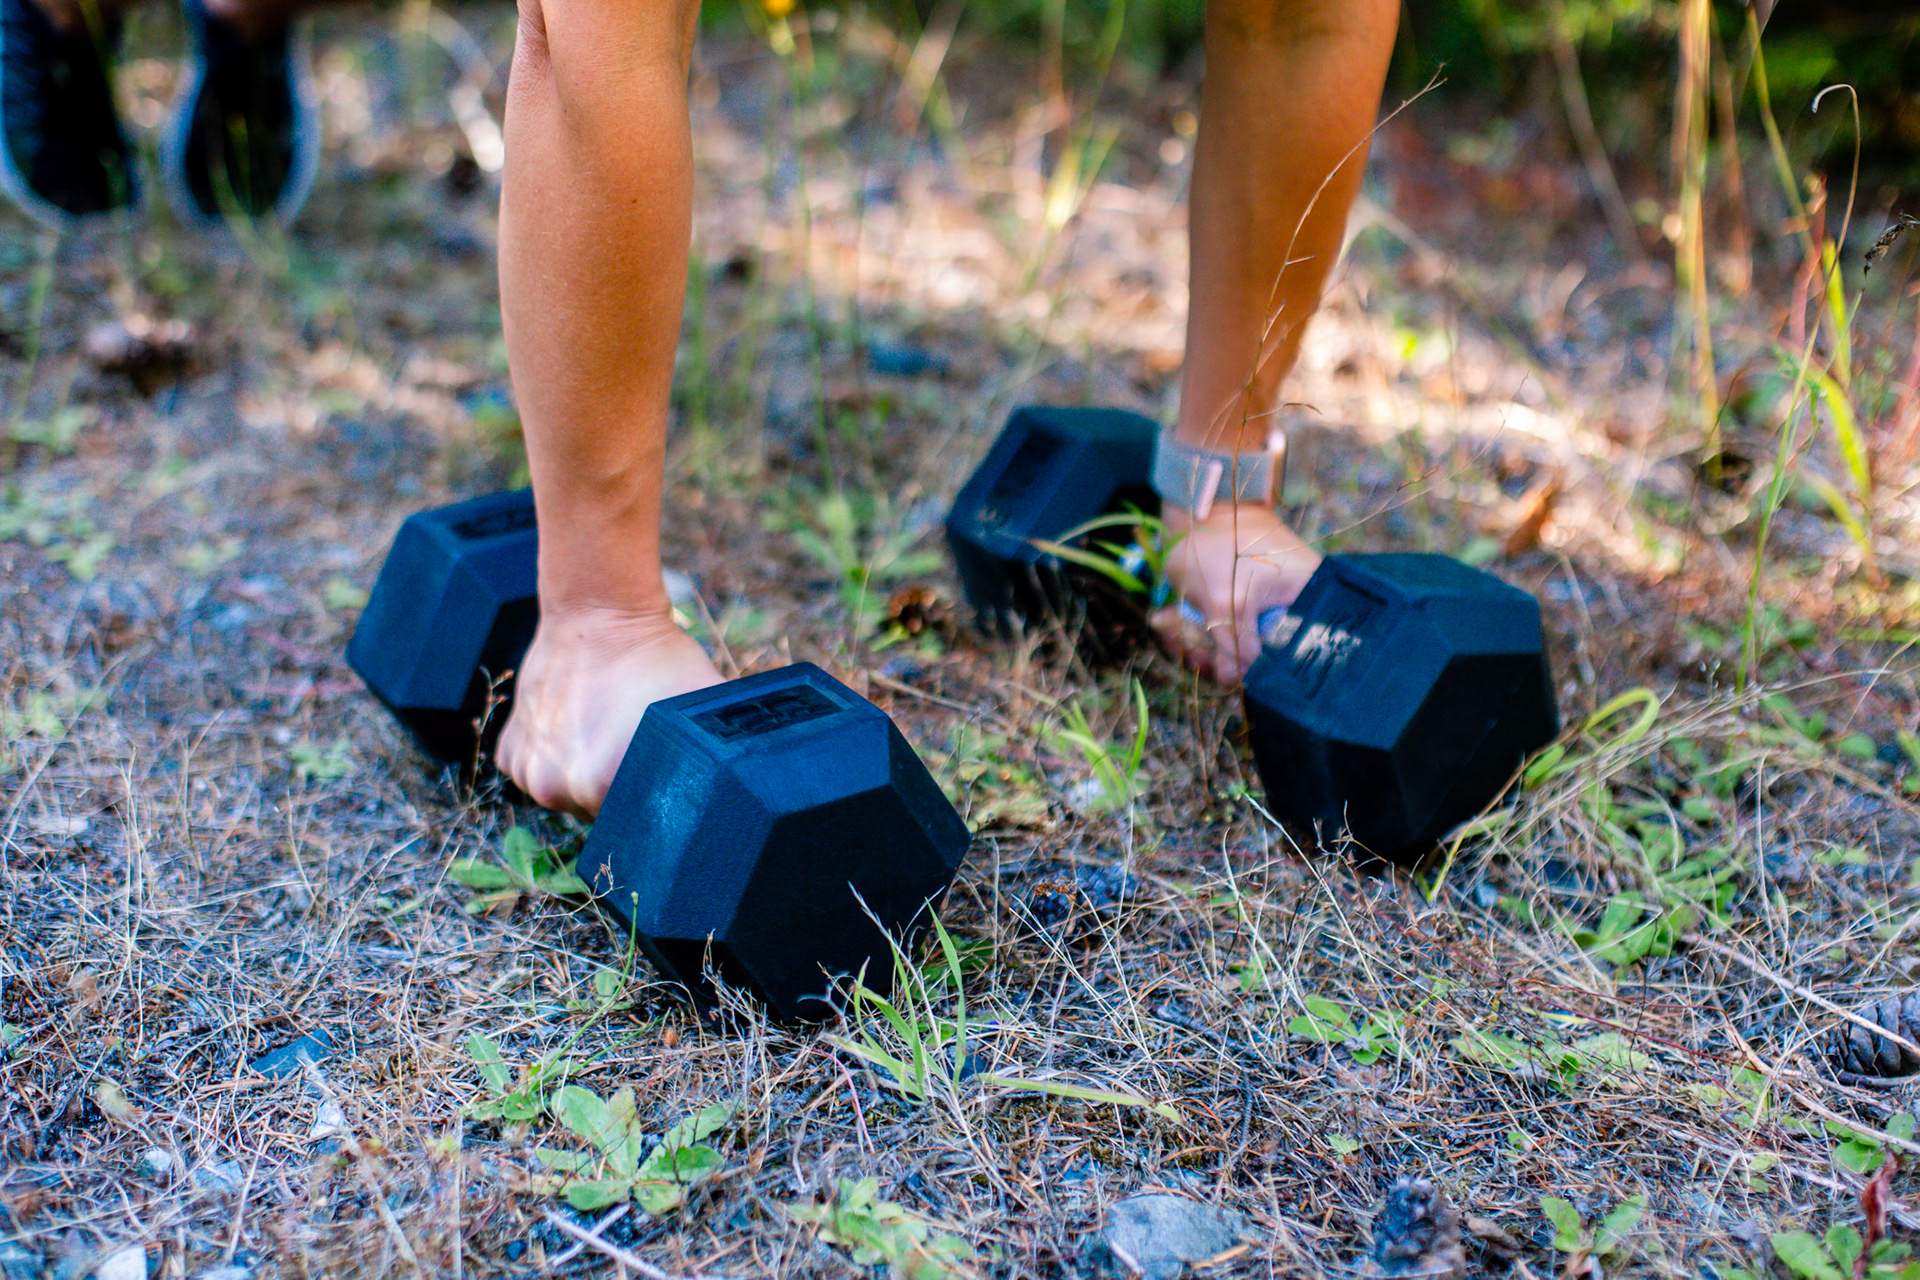 Outdoor fitness class with dumbbells